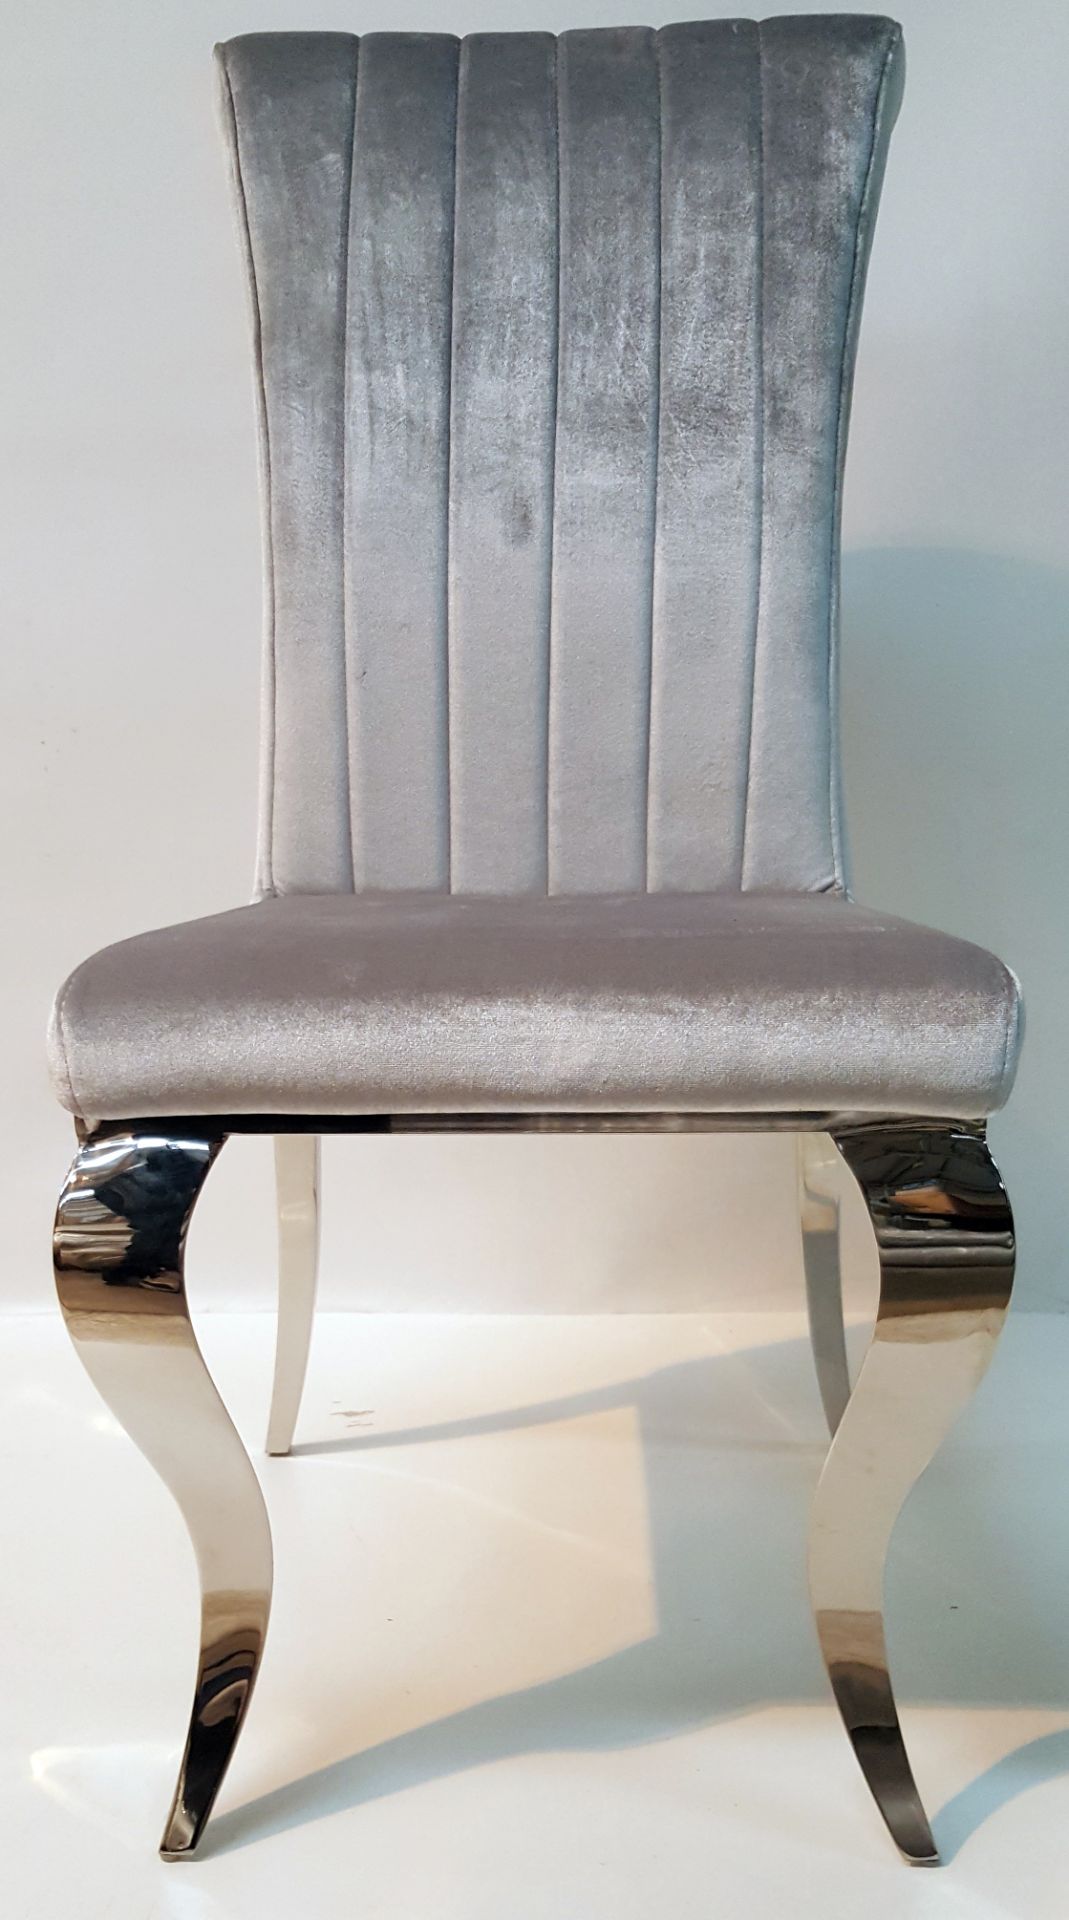 3 x STYLISH SILVER PLUSH VELOUR DRESSING/DINING TABLE CHAIRS - CL408 - Location: Altrincham WA14 - Image 2 of 5